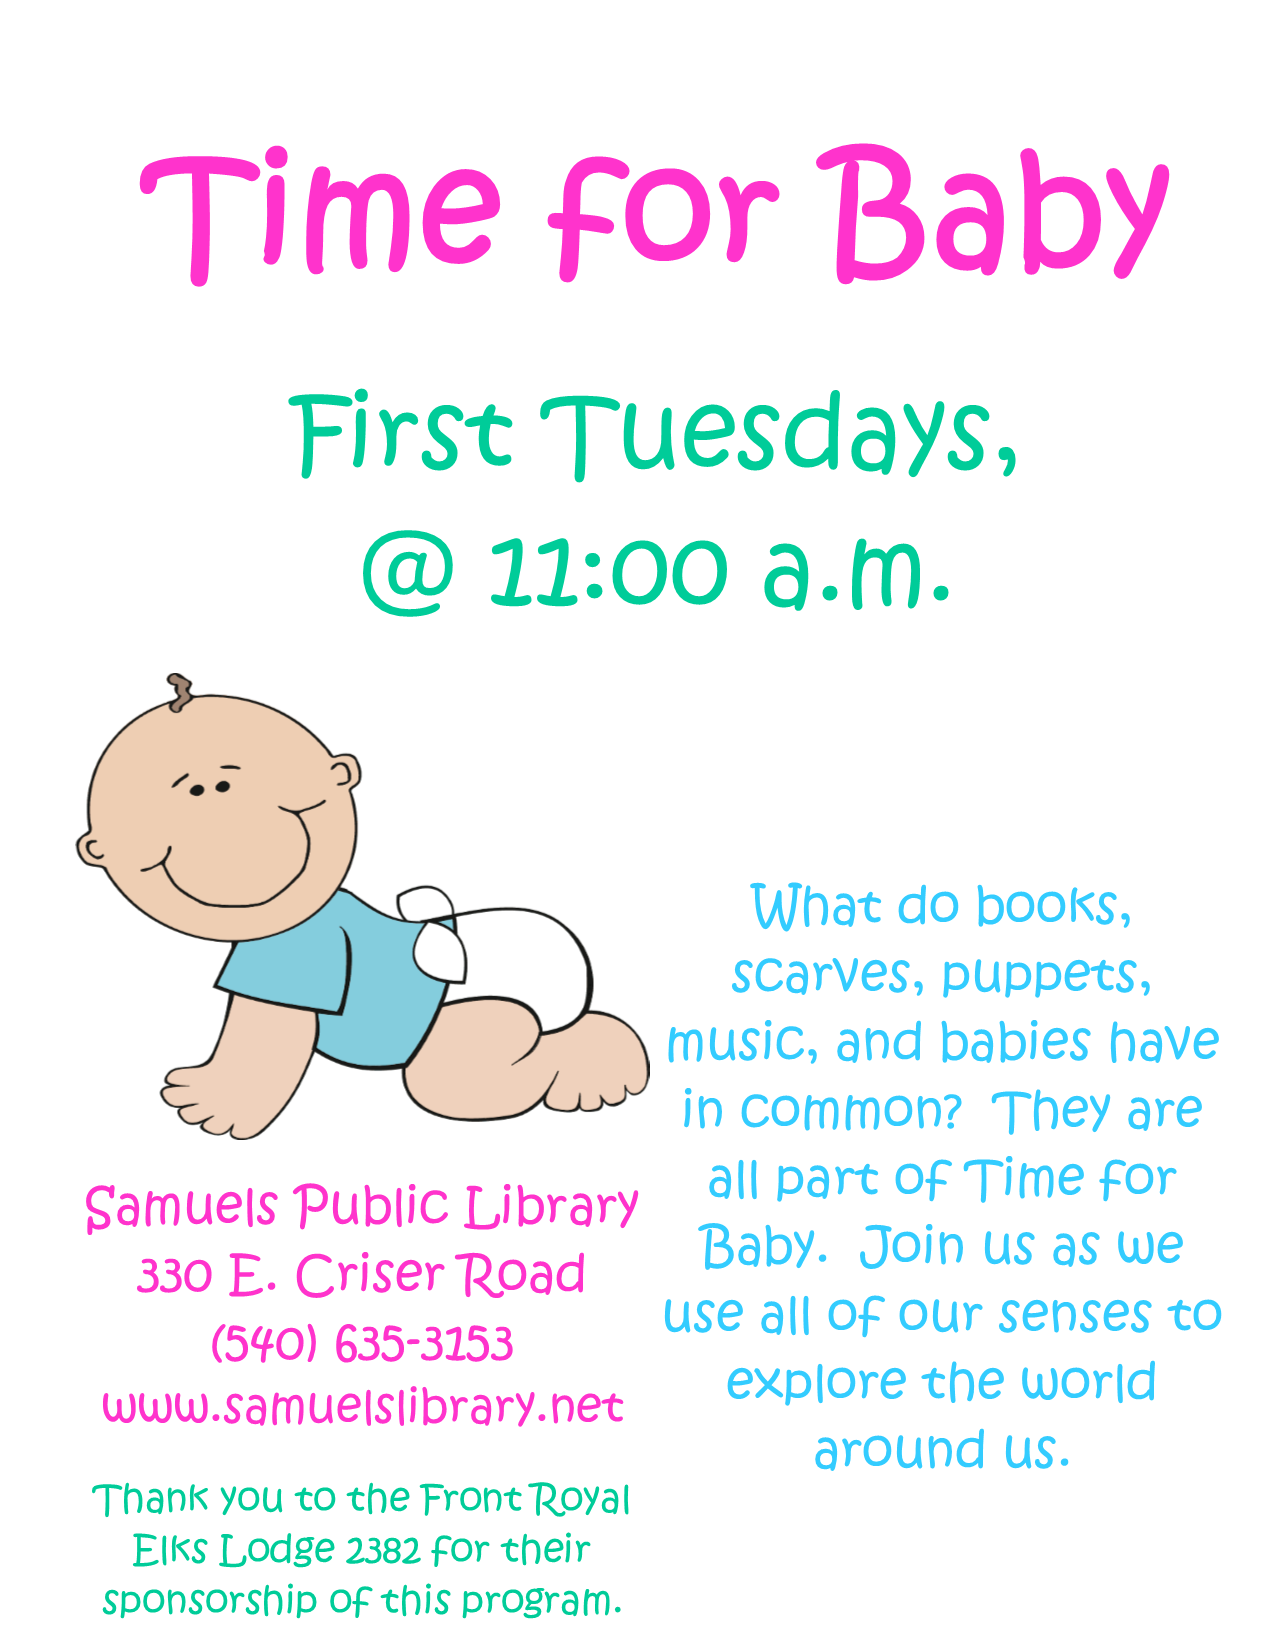 Time for Baby, First Tuesdays at 11:00 A.M.